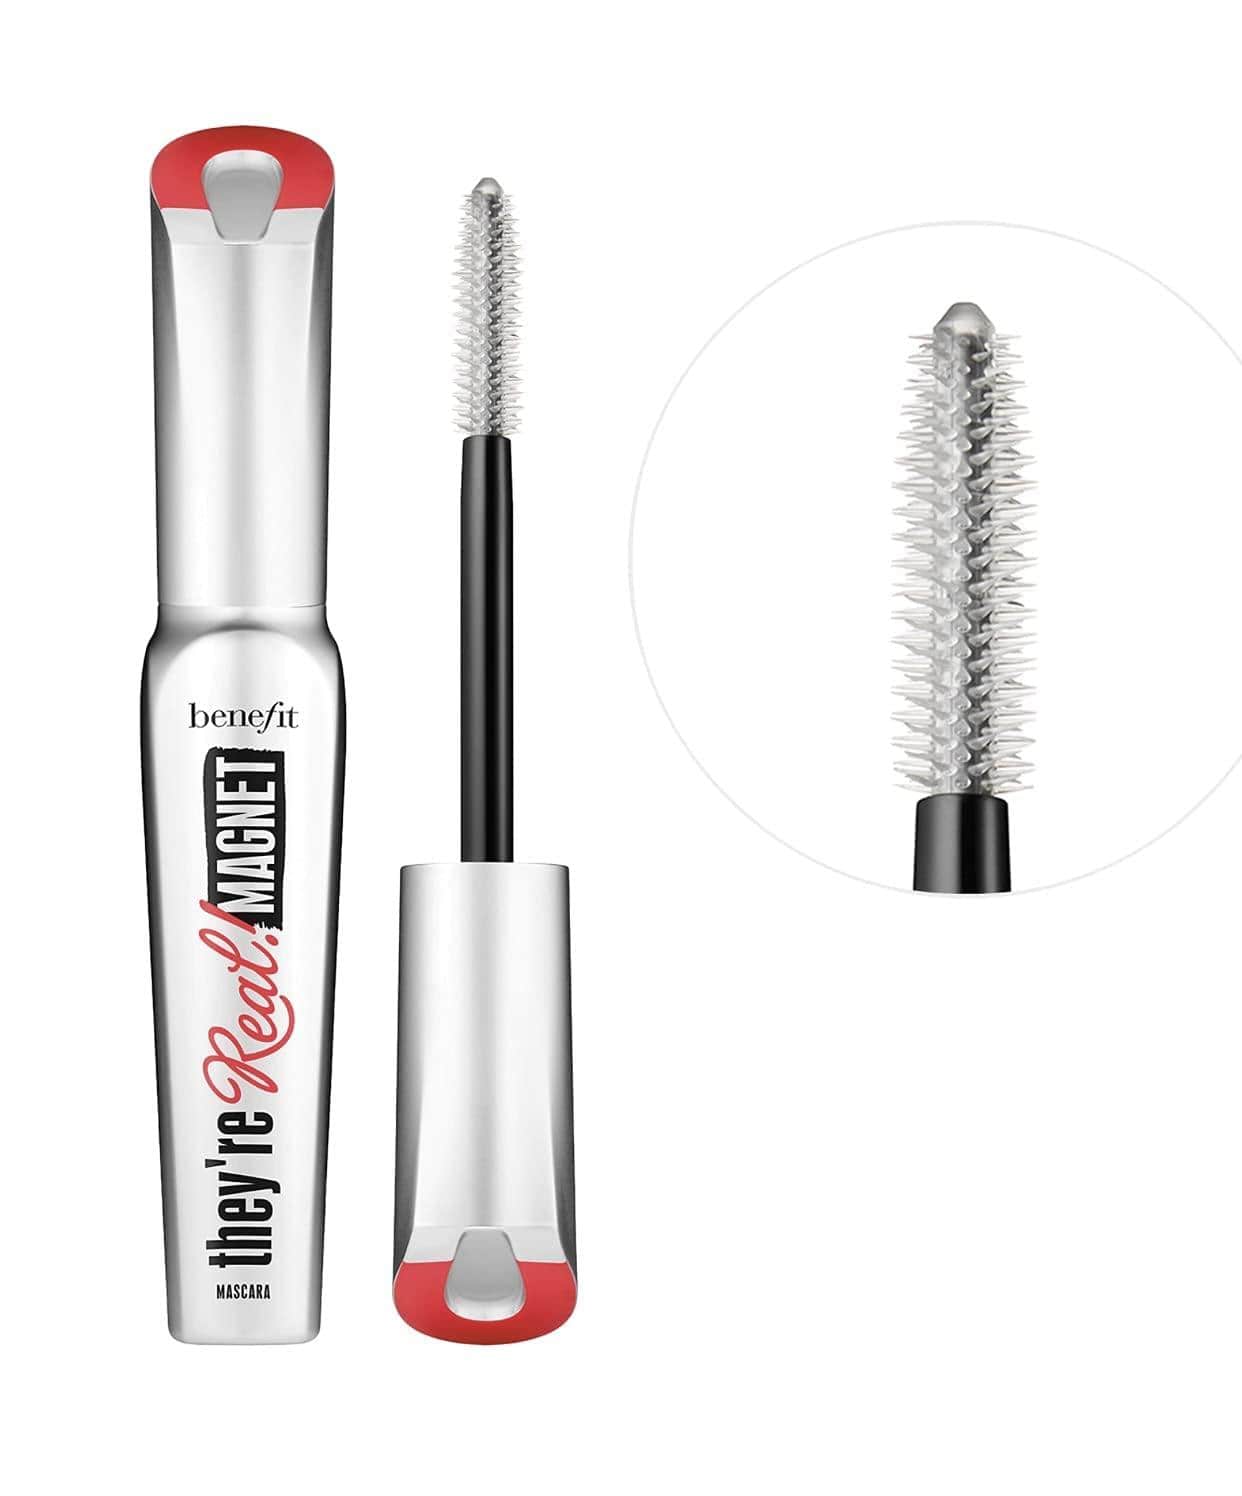 Benefit's mascara, a Best of Beauty Breakthrough Award winner, employs magnetically charged technology for lengthening without clumps, making it my top choice for the best mascara for length and volume.